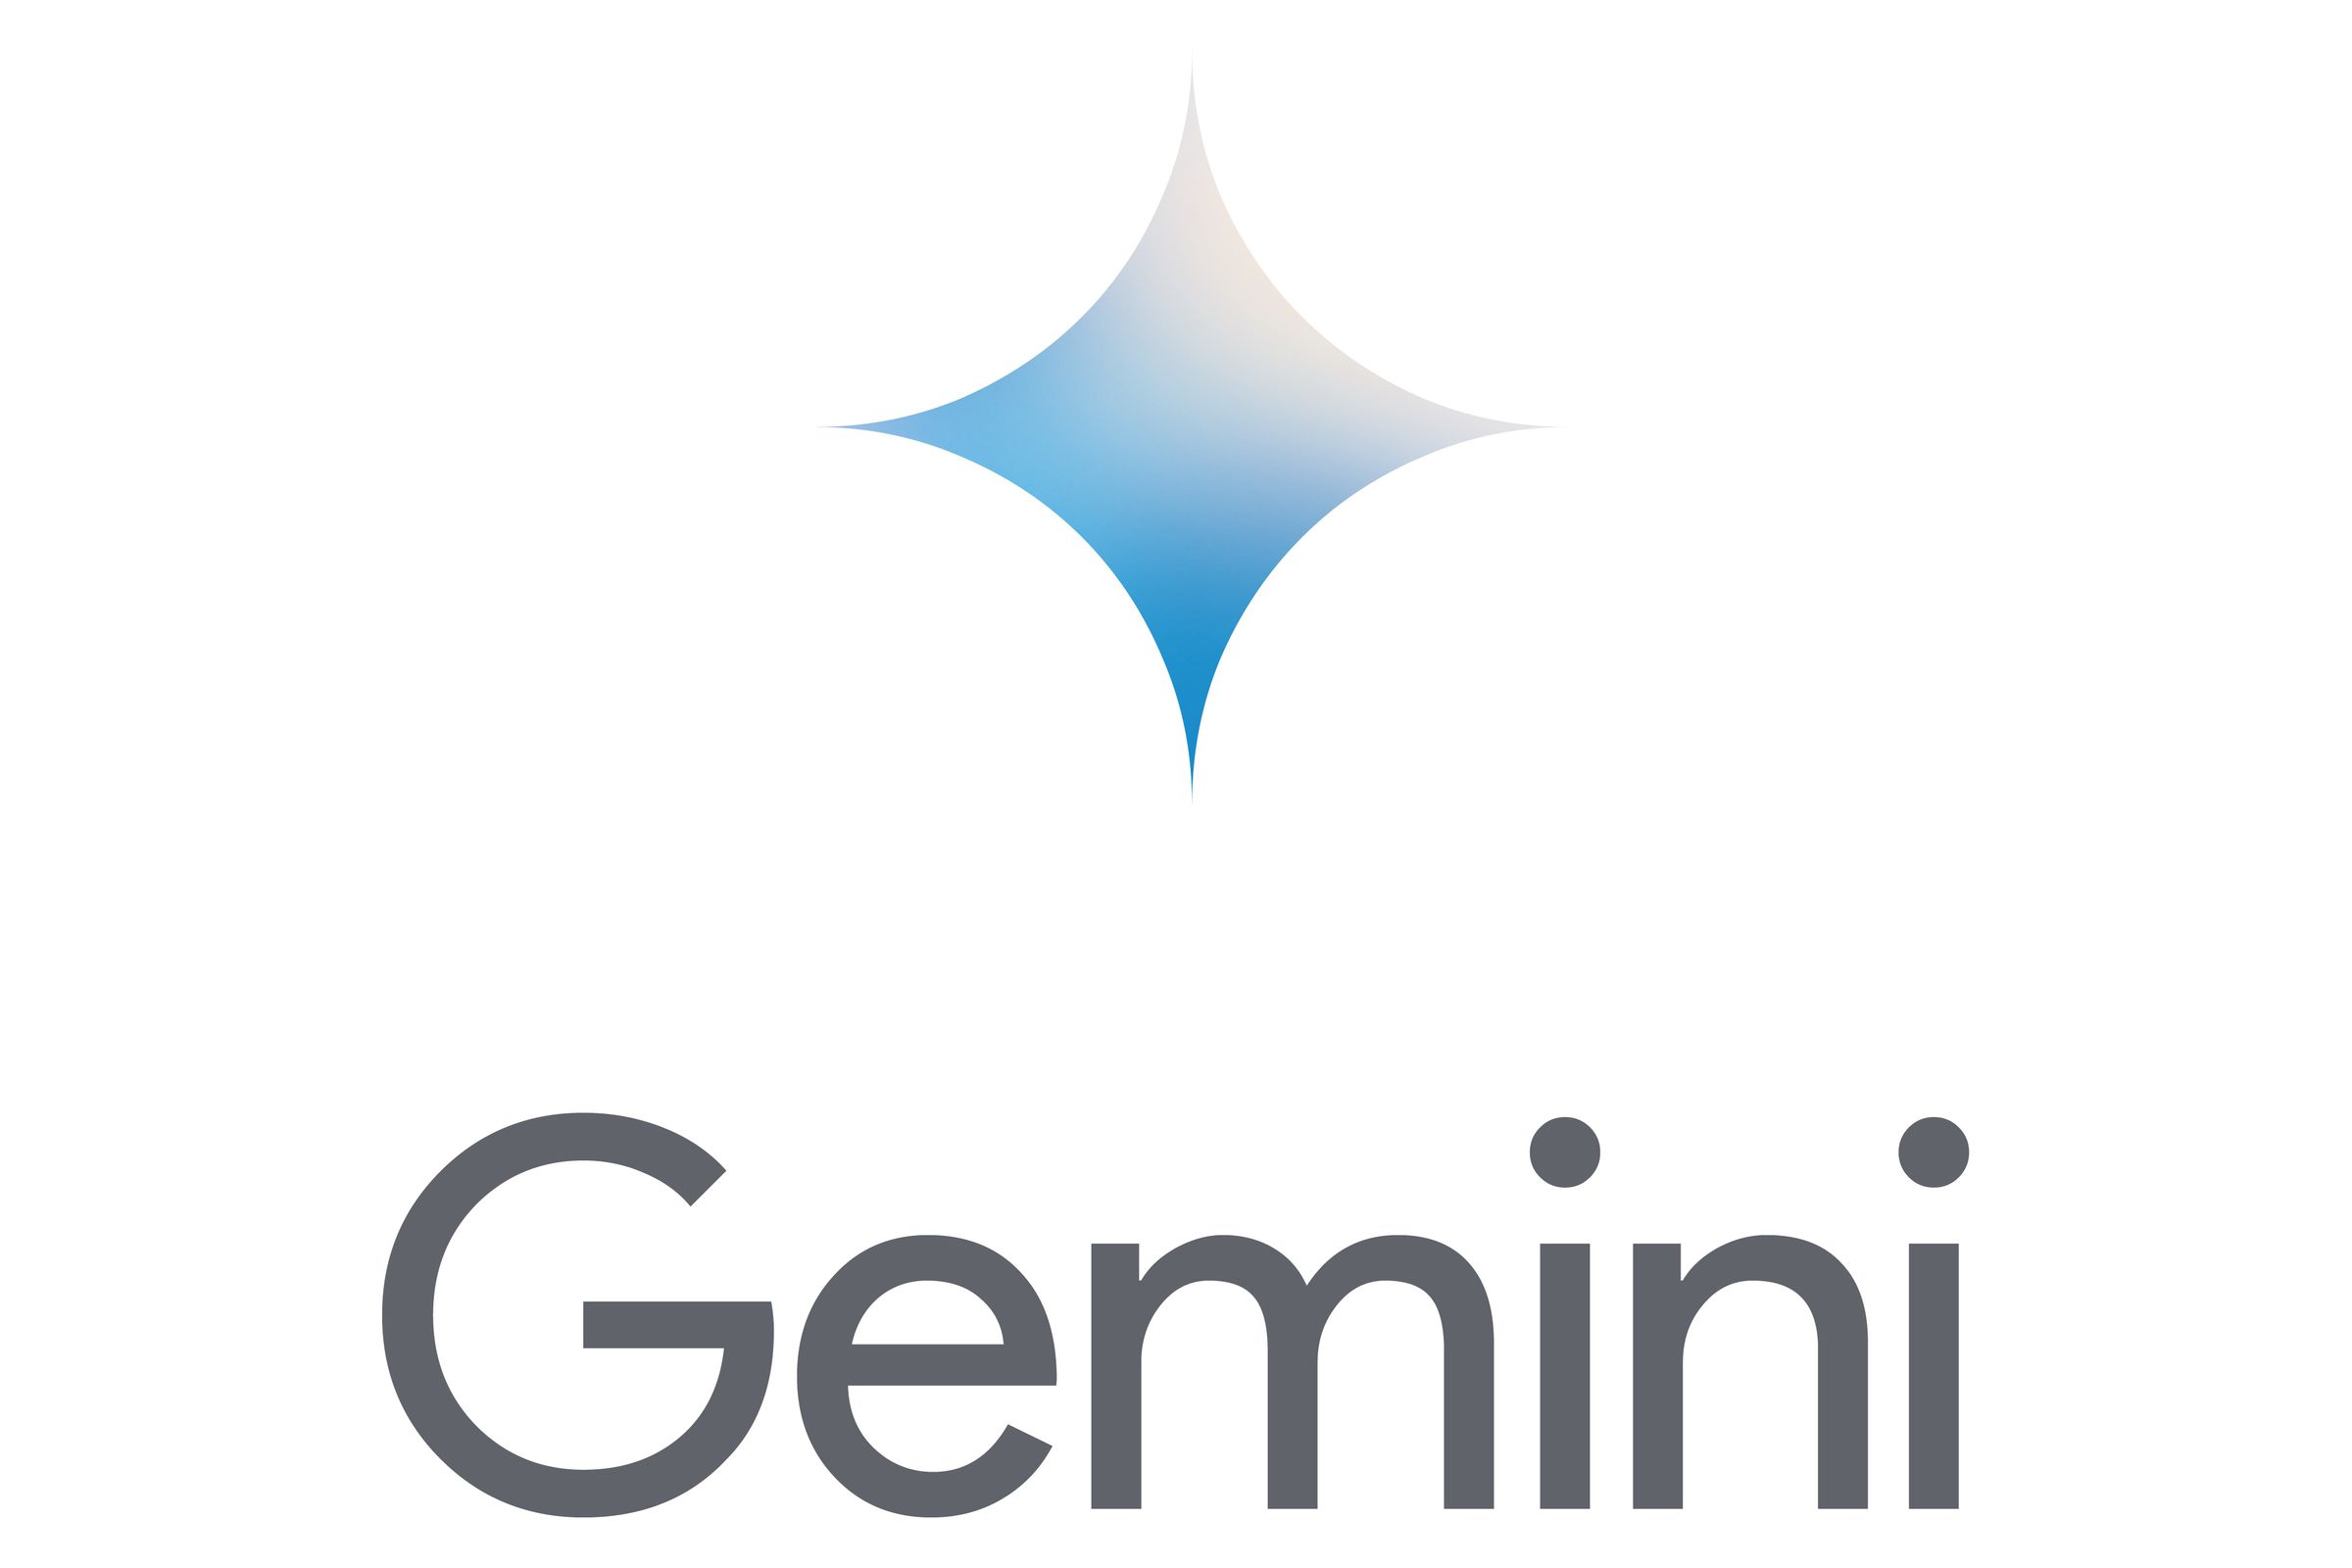 A picture of the Gemini logo, a wordmark with a four-pointed diagram above.